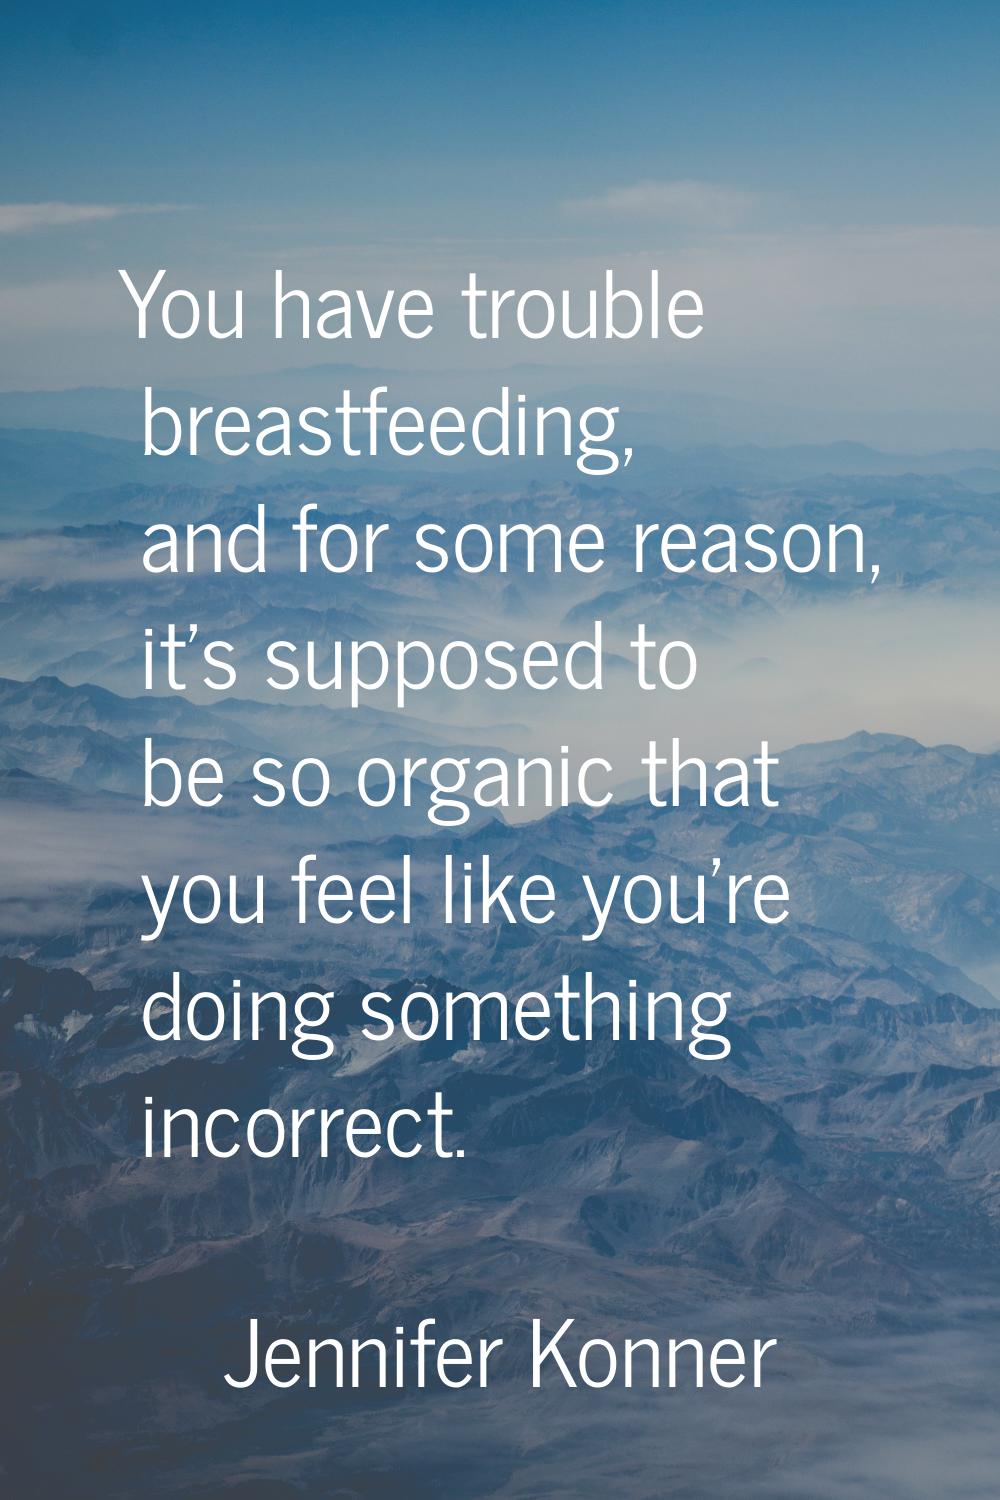 You have trouble breastfeeding, and for some reason, it's supposed to be so organic that you feel l